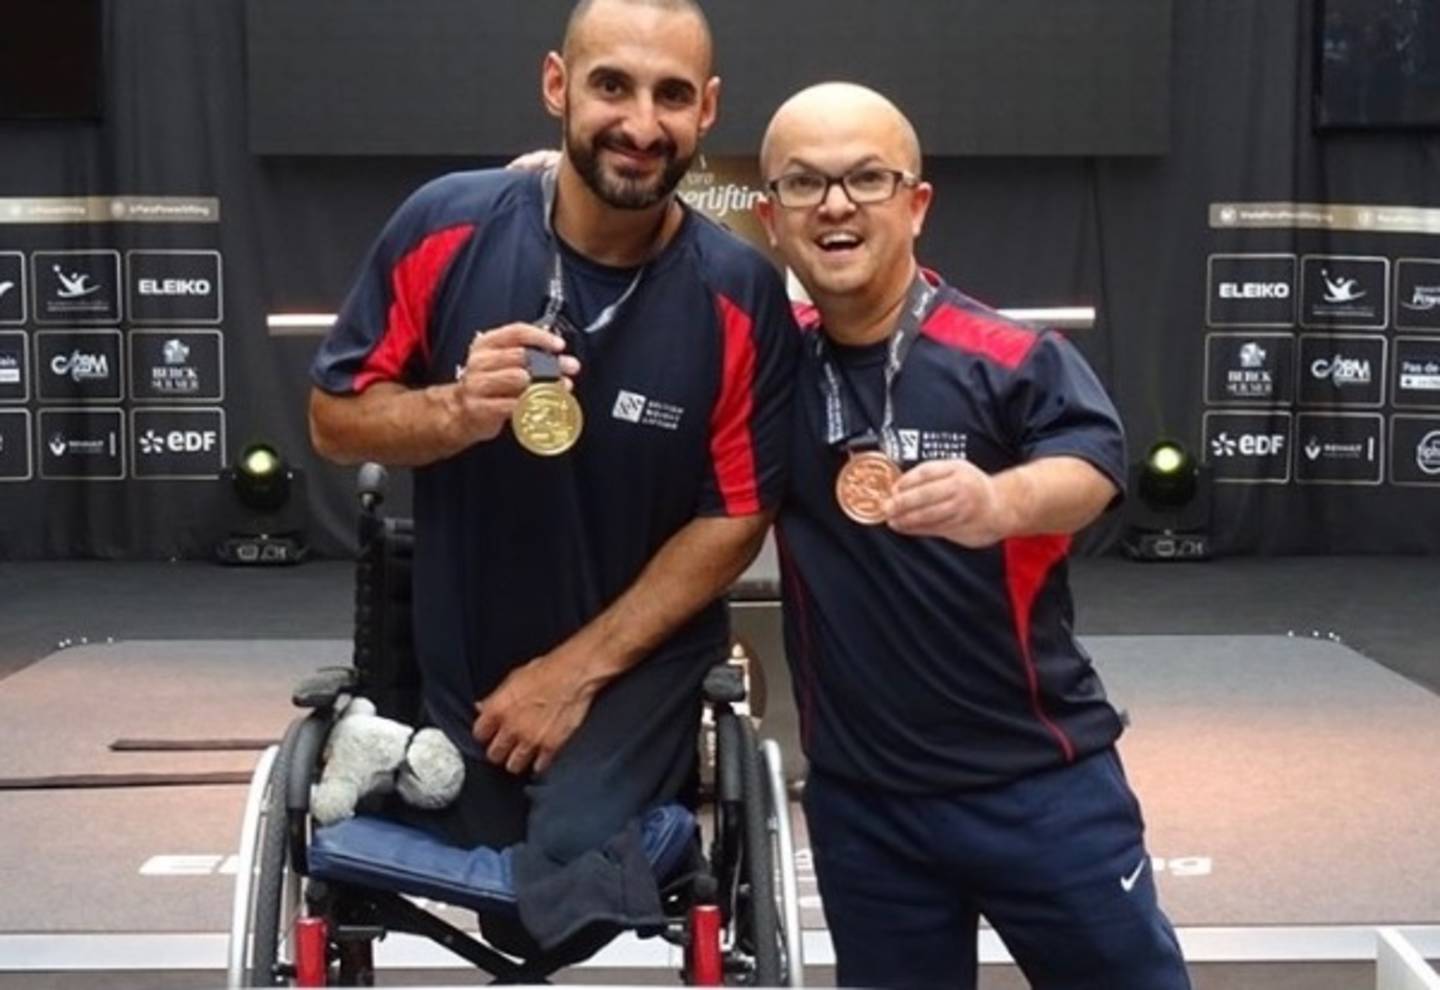 Ali Jawad and Adam Alderman with medals in hand at the Para Powerlifting Championships.